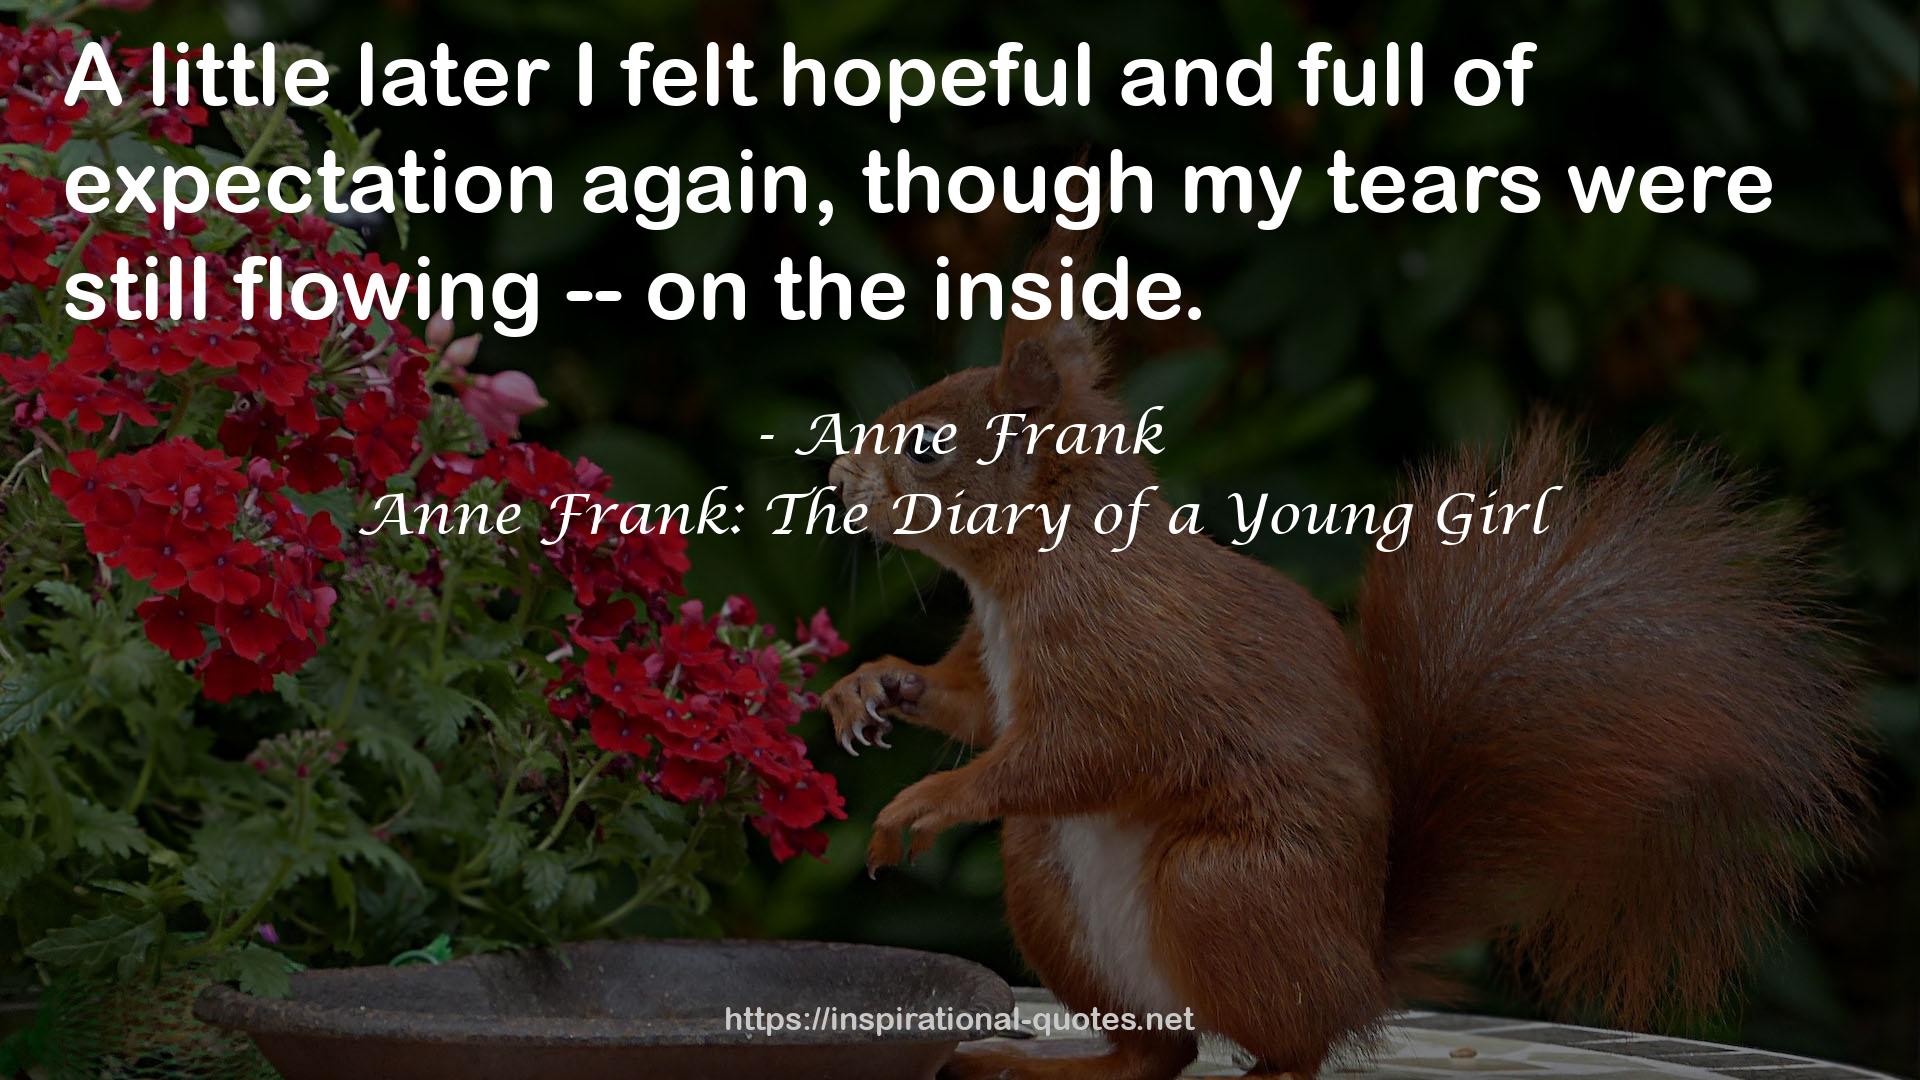 Anne Frank: The Diary of a Young Girl QUOTES